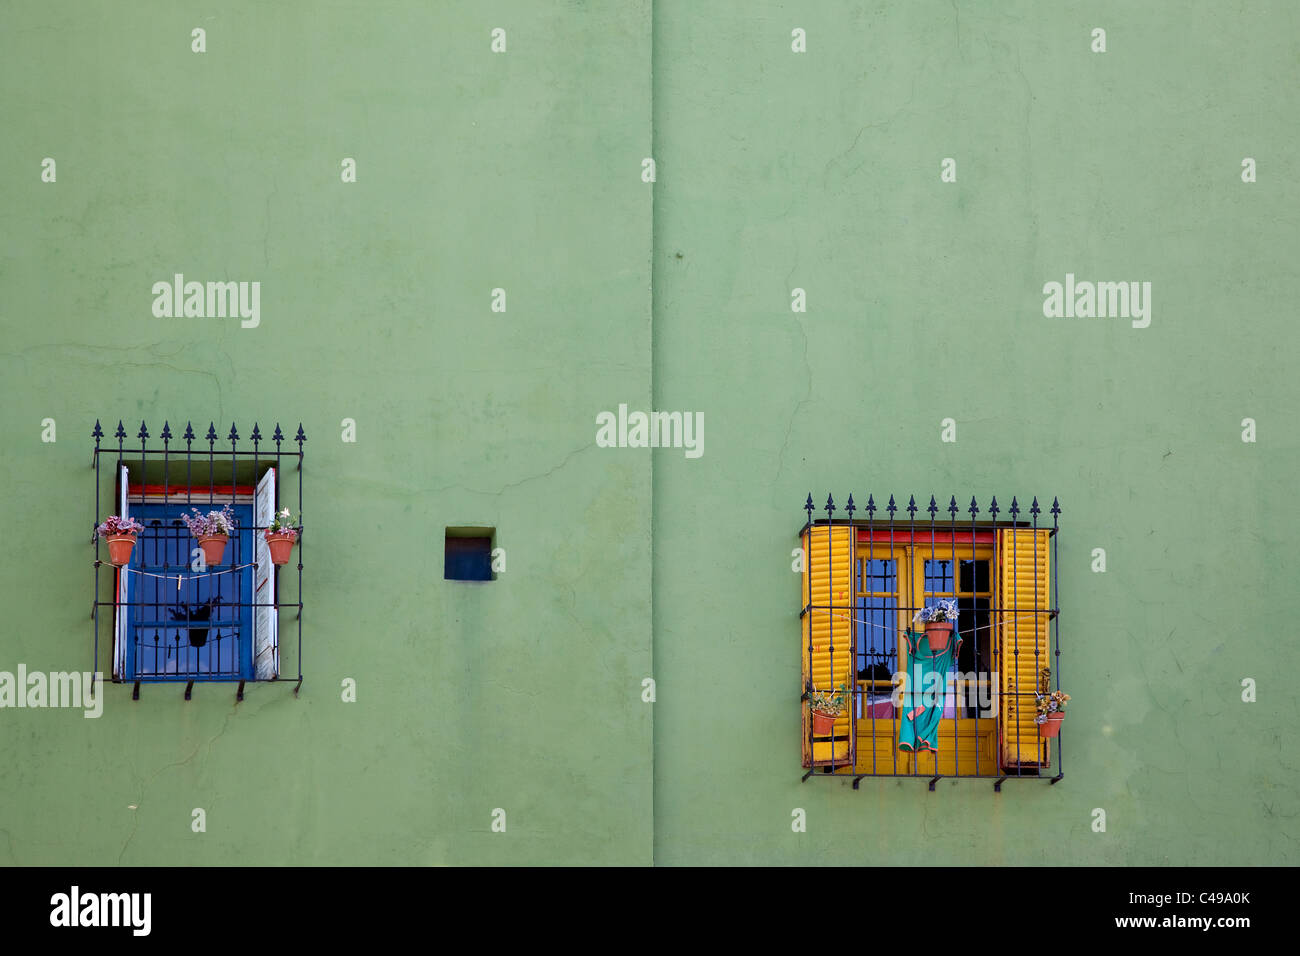 Colorfully painted building with window in the Caminito, La Boca district, Buenos Aires, Argentina, South America. Stock Photo